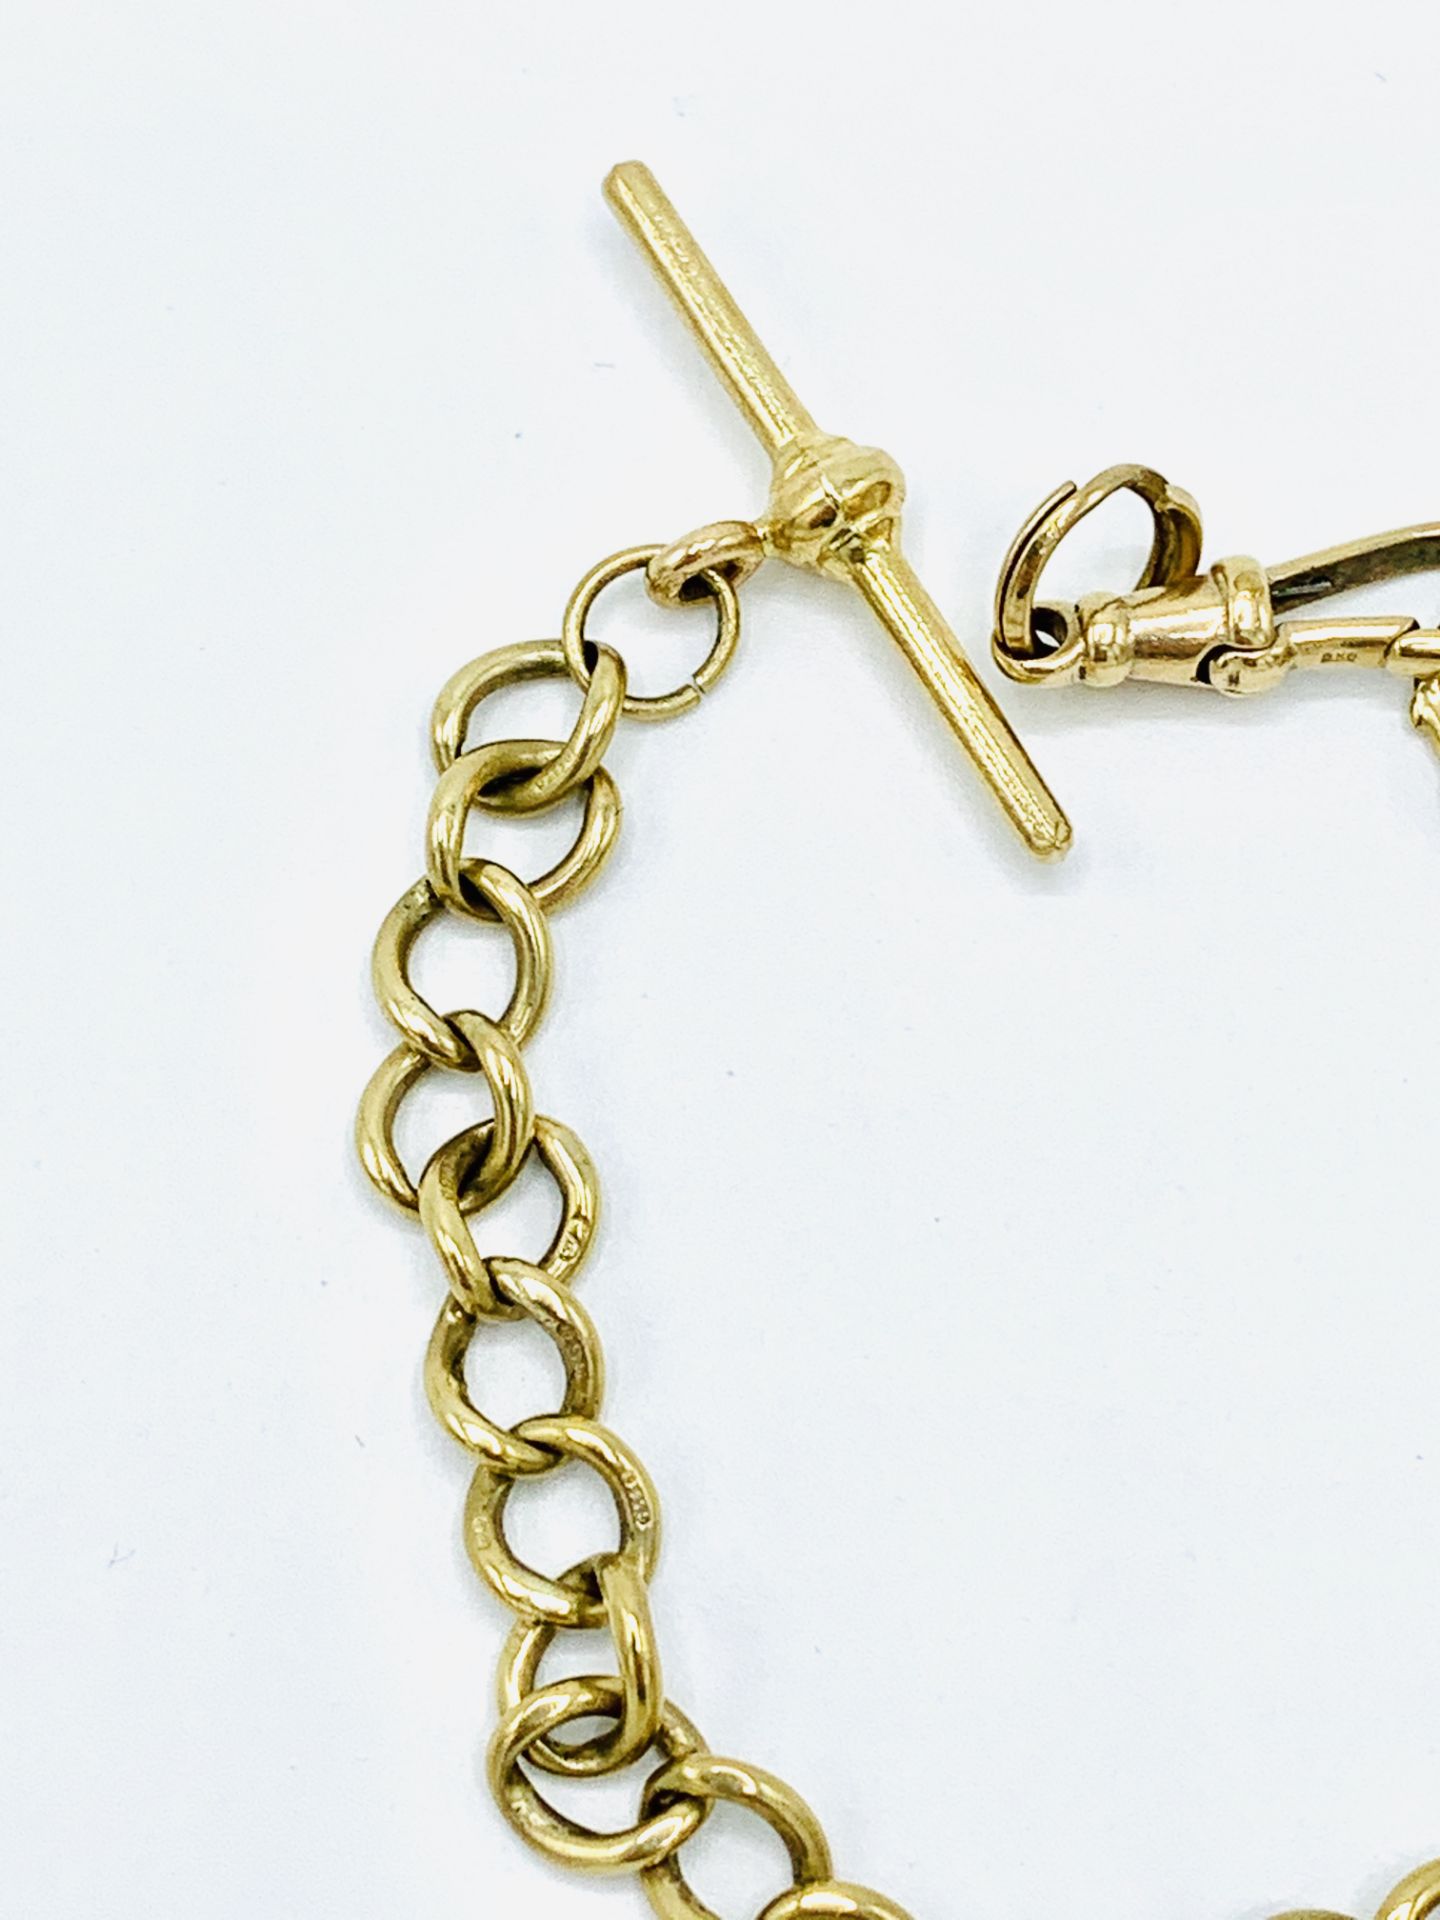 9ct gold fob chain. - Image 4 of 5